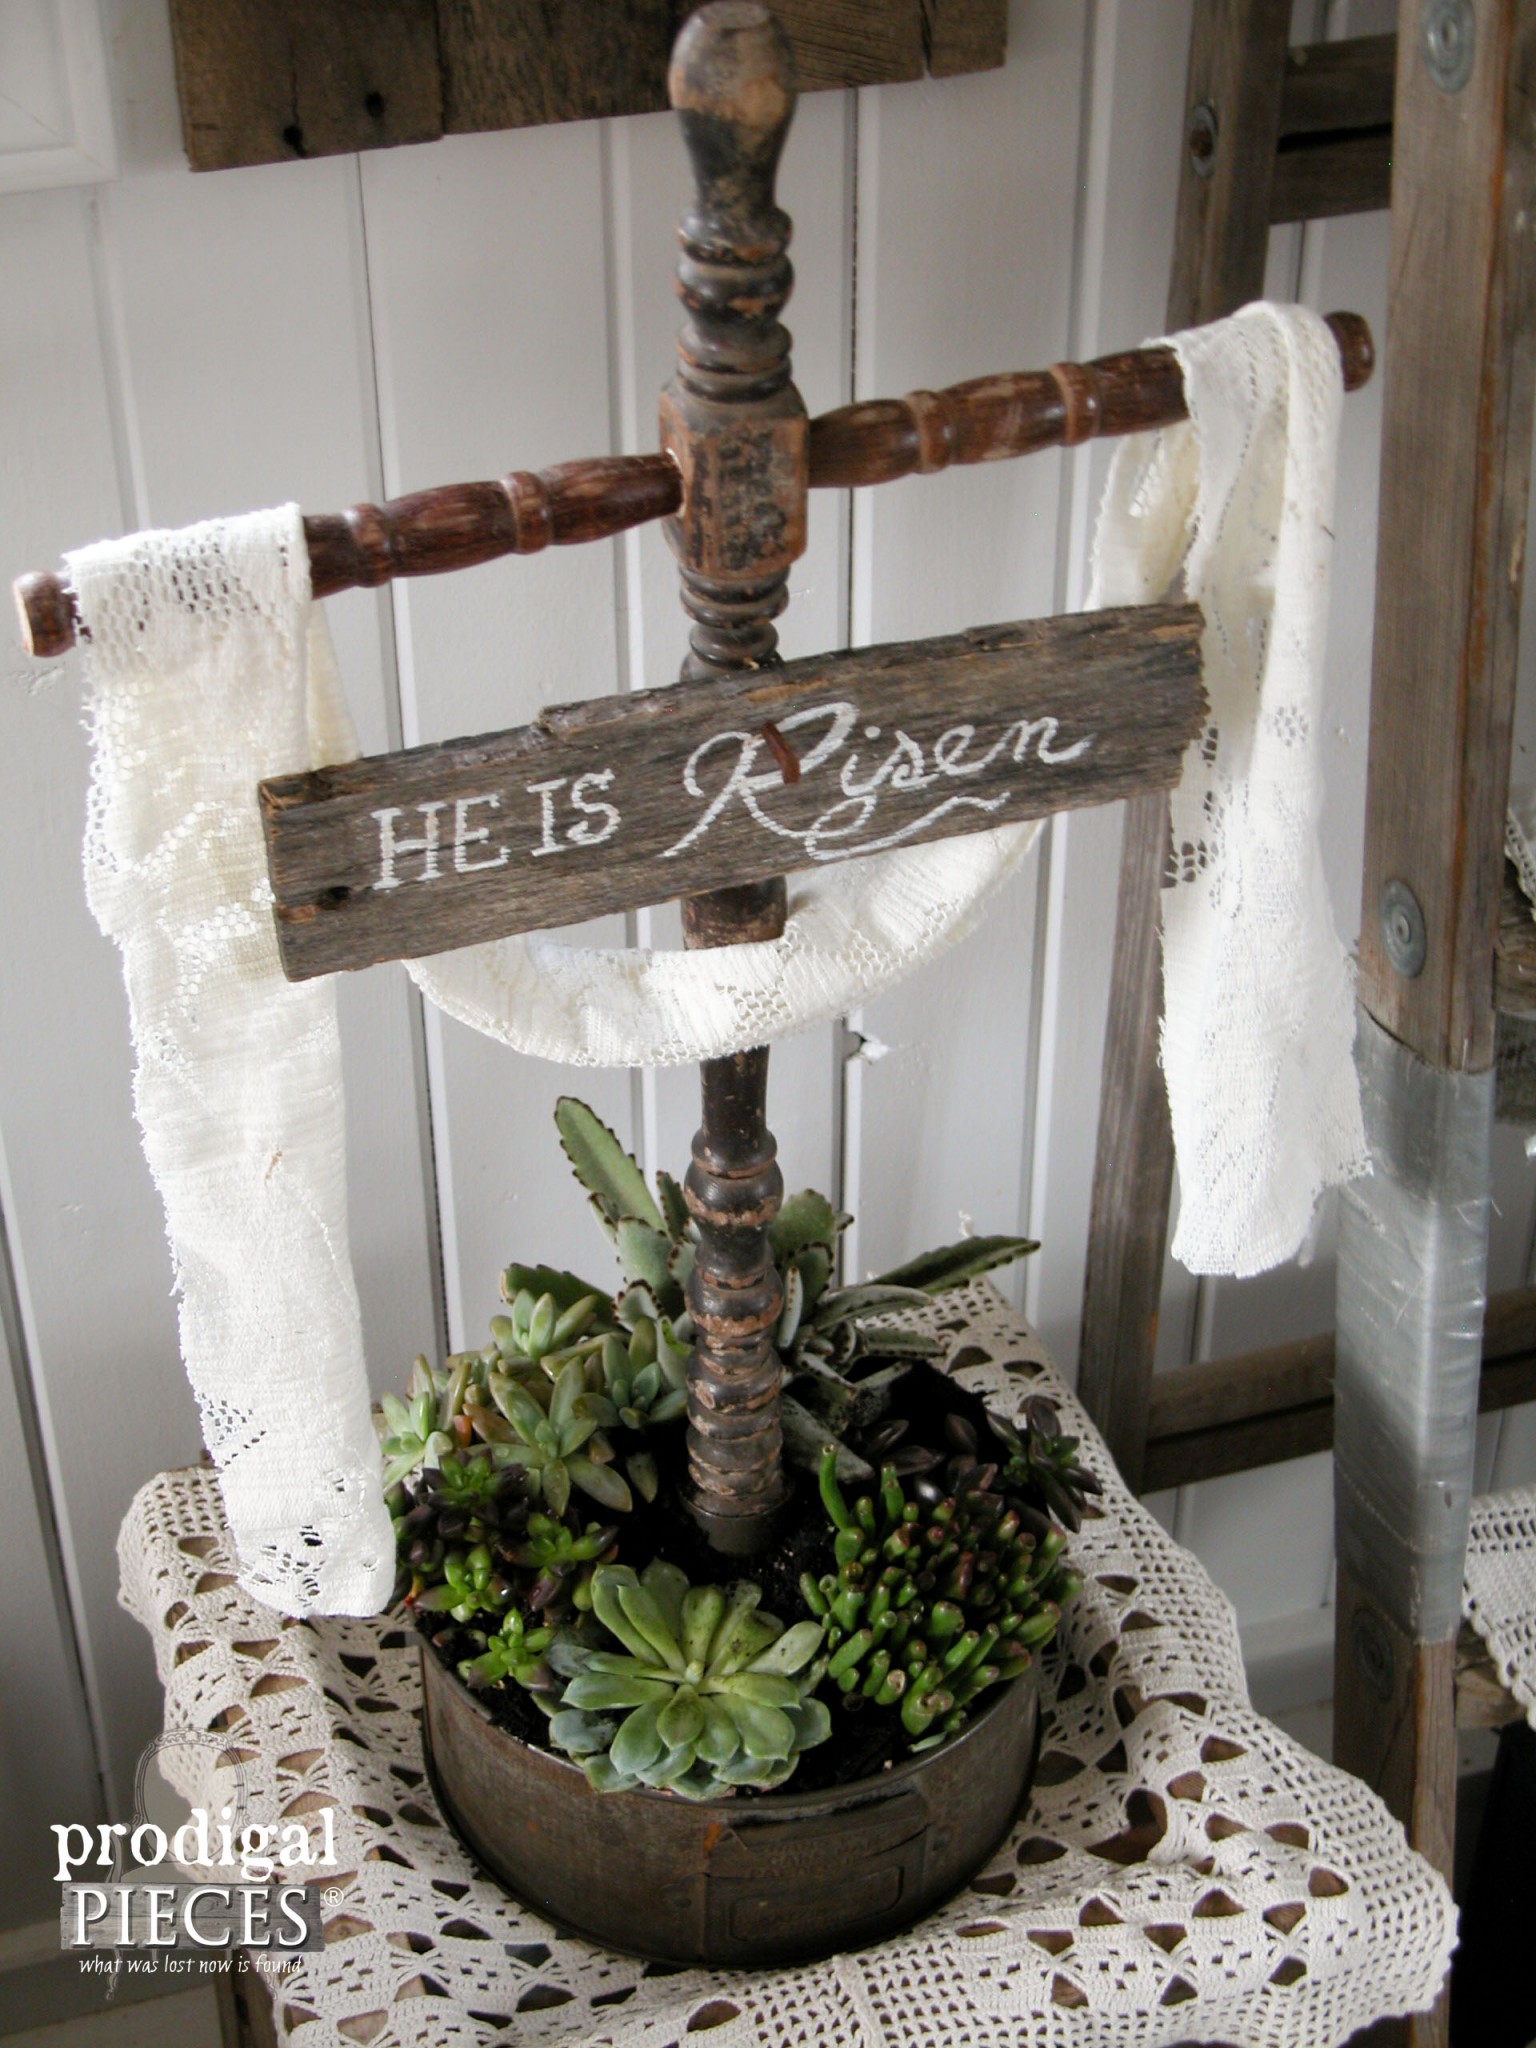 Reclaimed Vintage Finds Become Easter Cross Succulent Planter by Prodigal Pieces | prodigalpieces.com